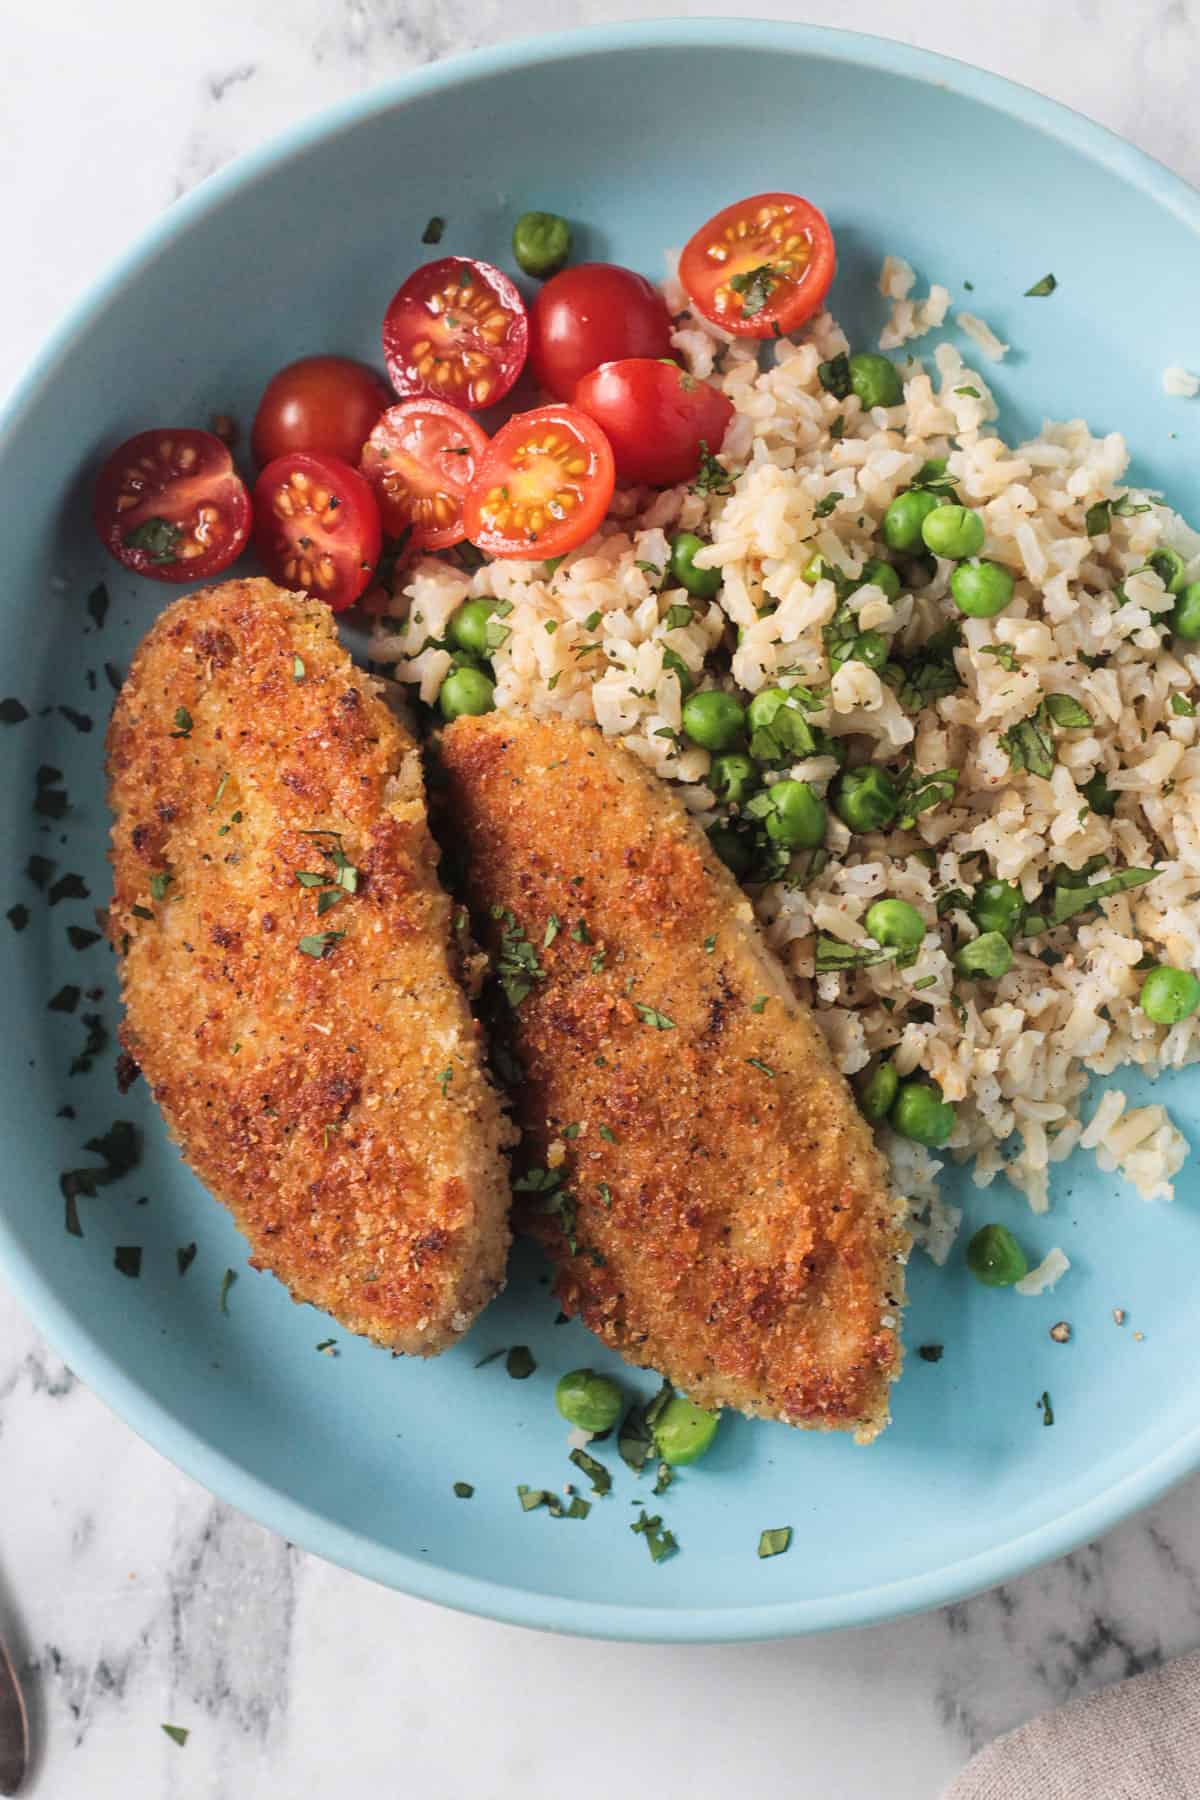 Close up of crispy breaded cutlets on a bed of rice.